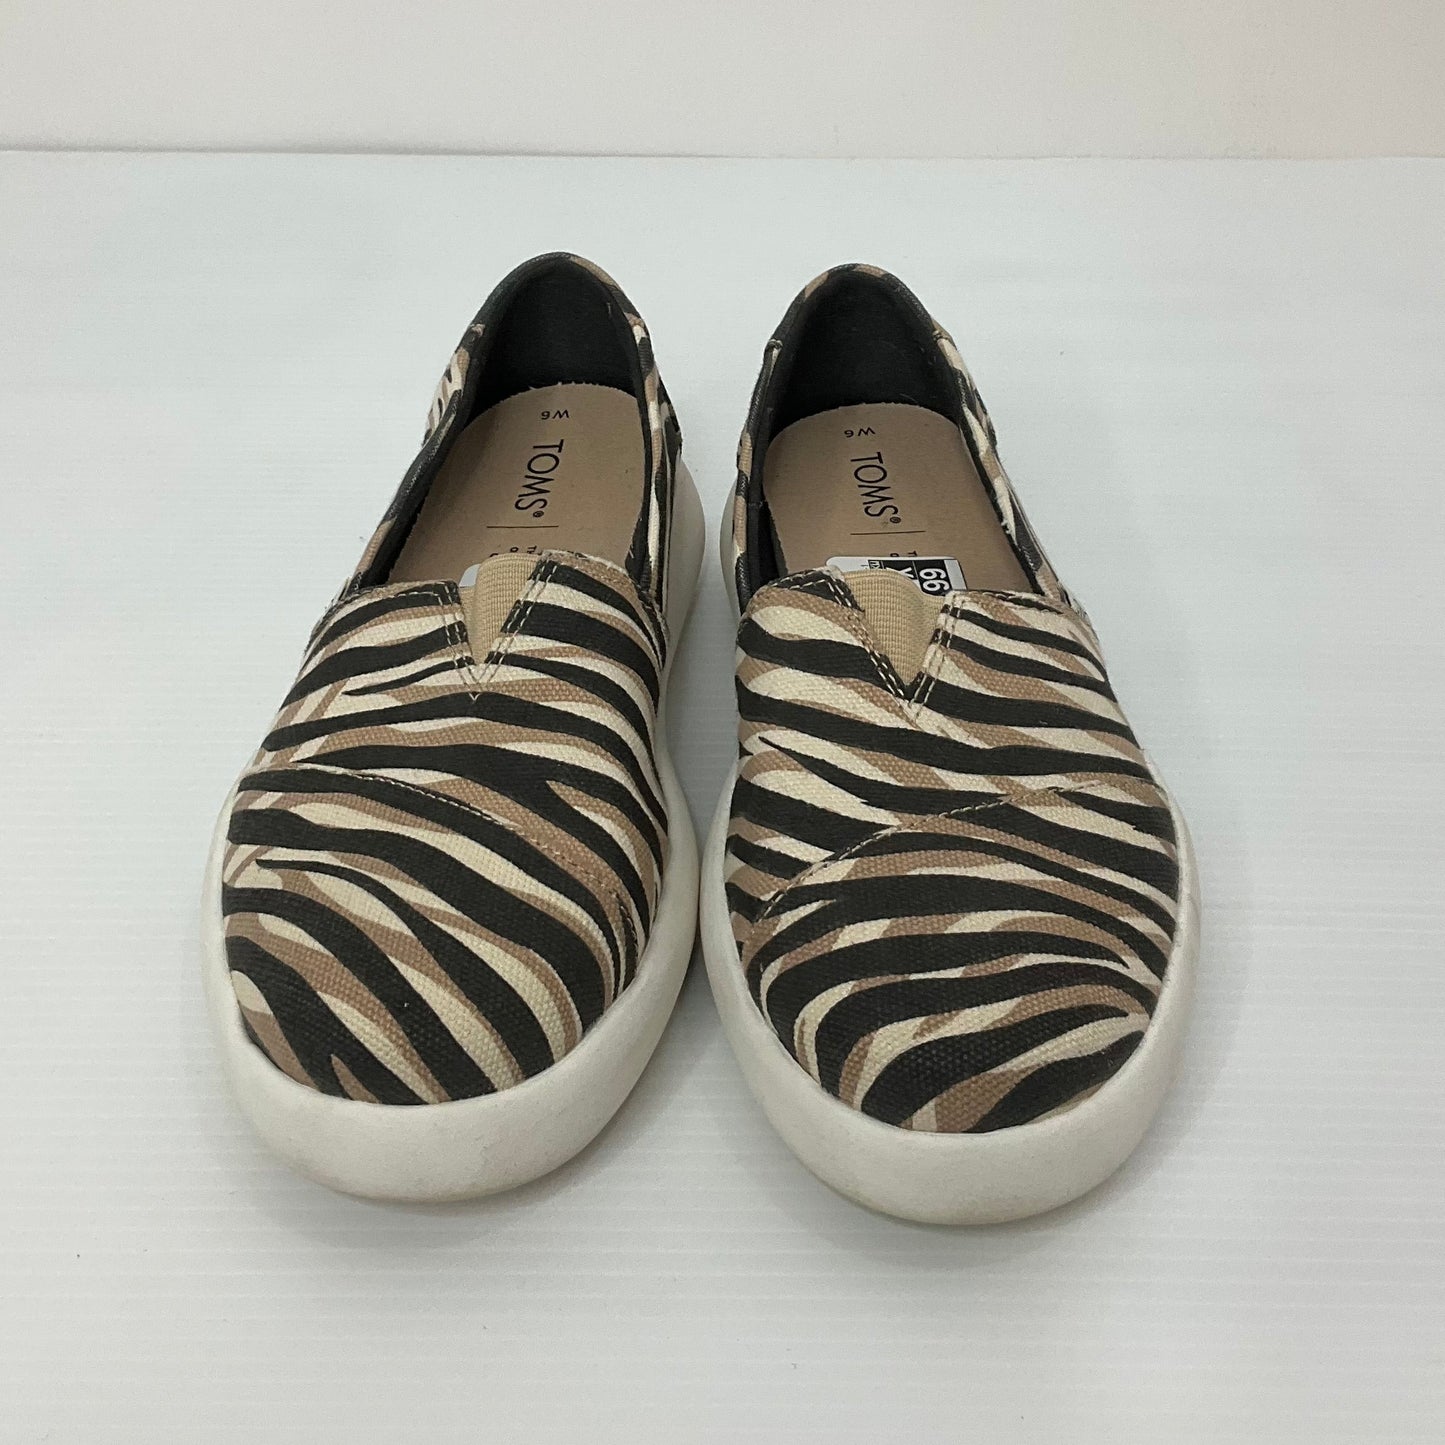 Animal Print Shoes Sneakers Toms, Size 6